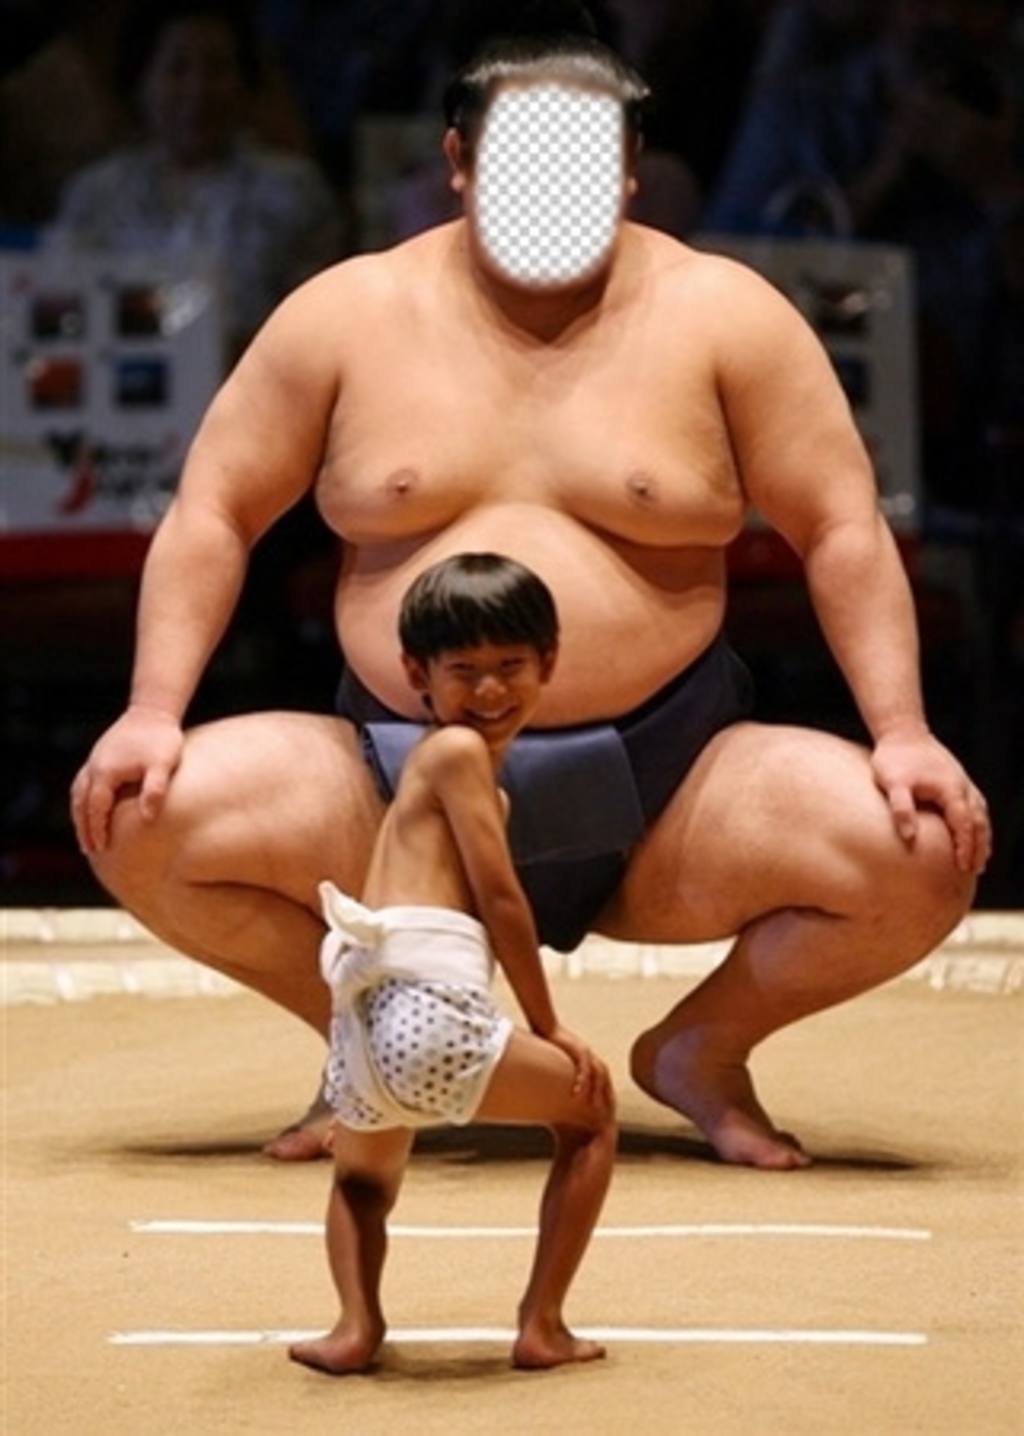 Funny online effect to put your face in a Sumo wrestler ..